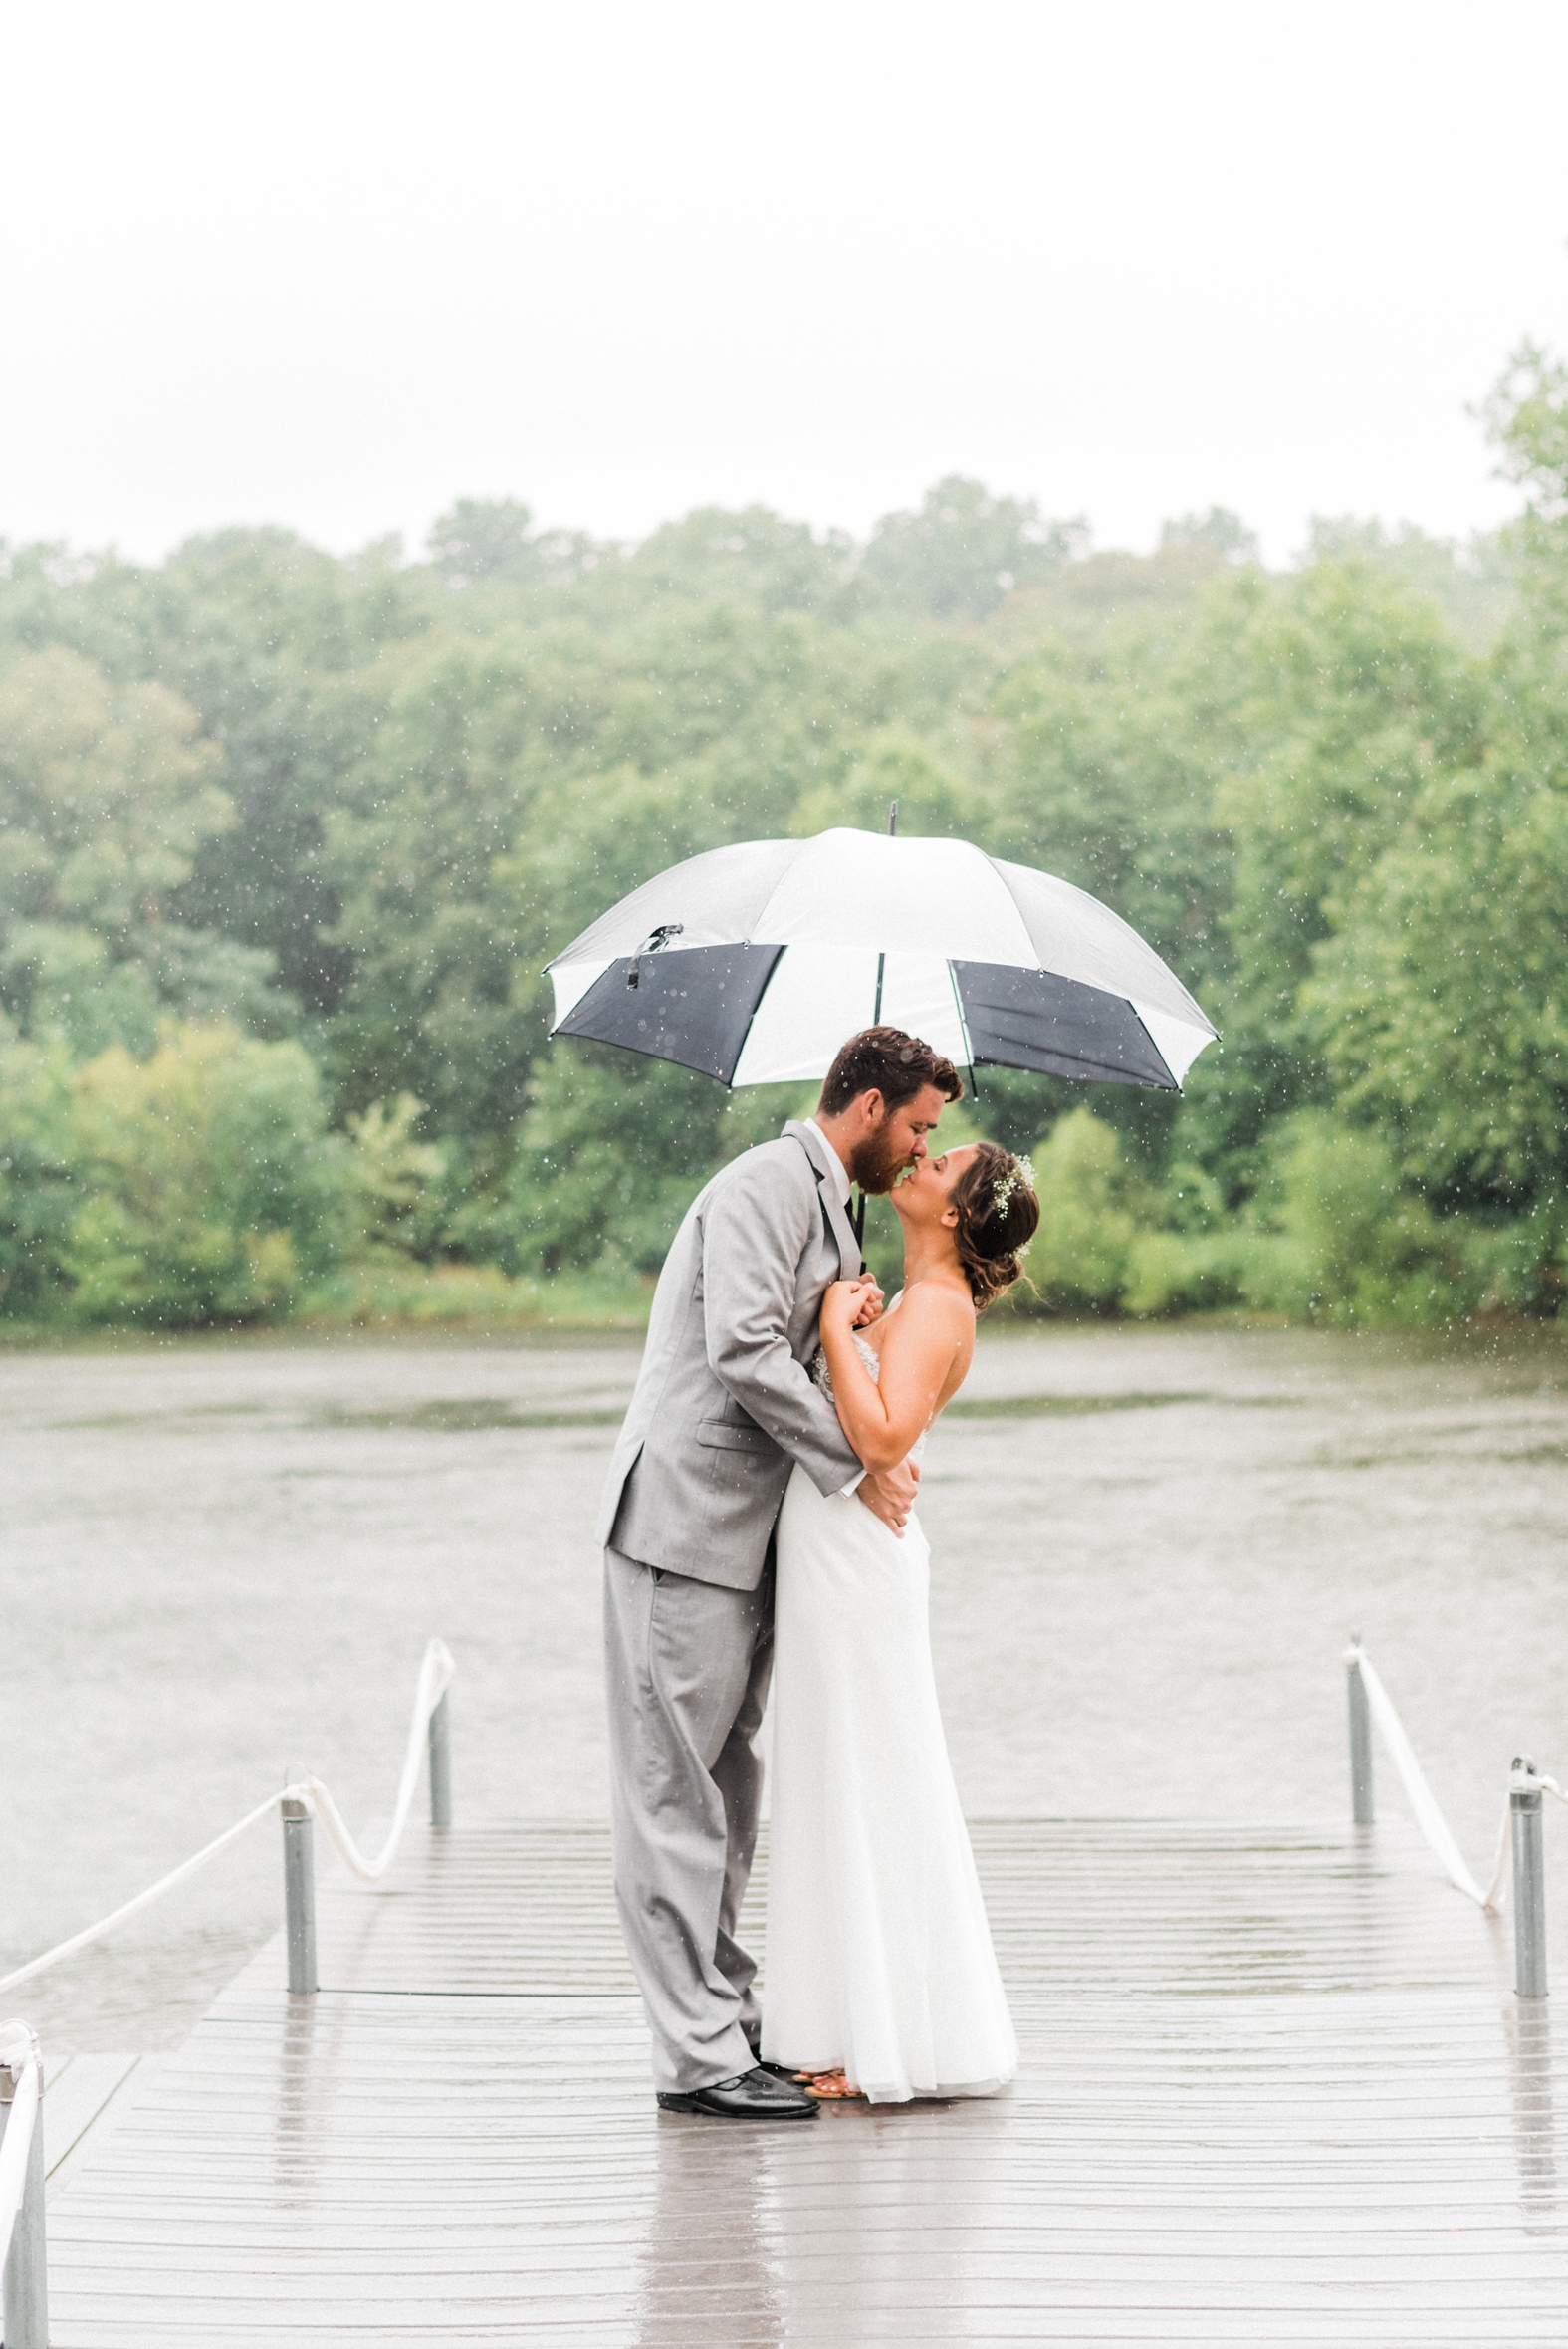 Bride and groom kissing on dock in rain with black and white umbrella. Groom in gray suit with black tie.